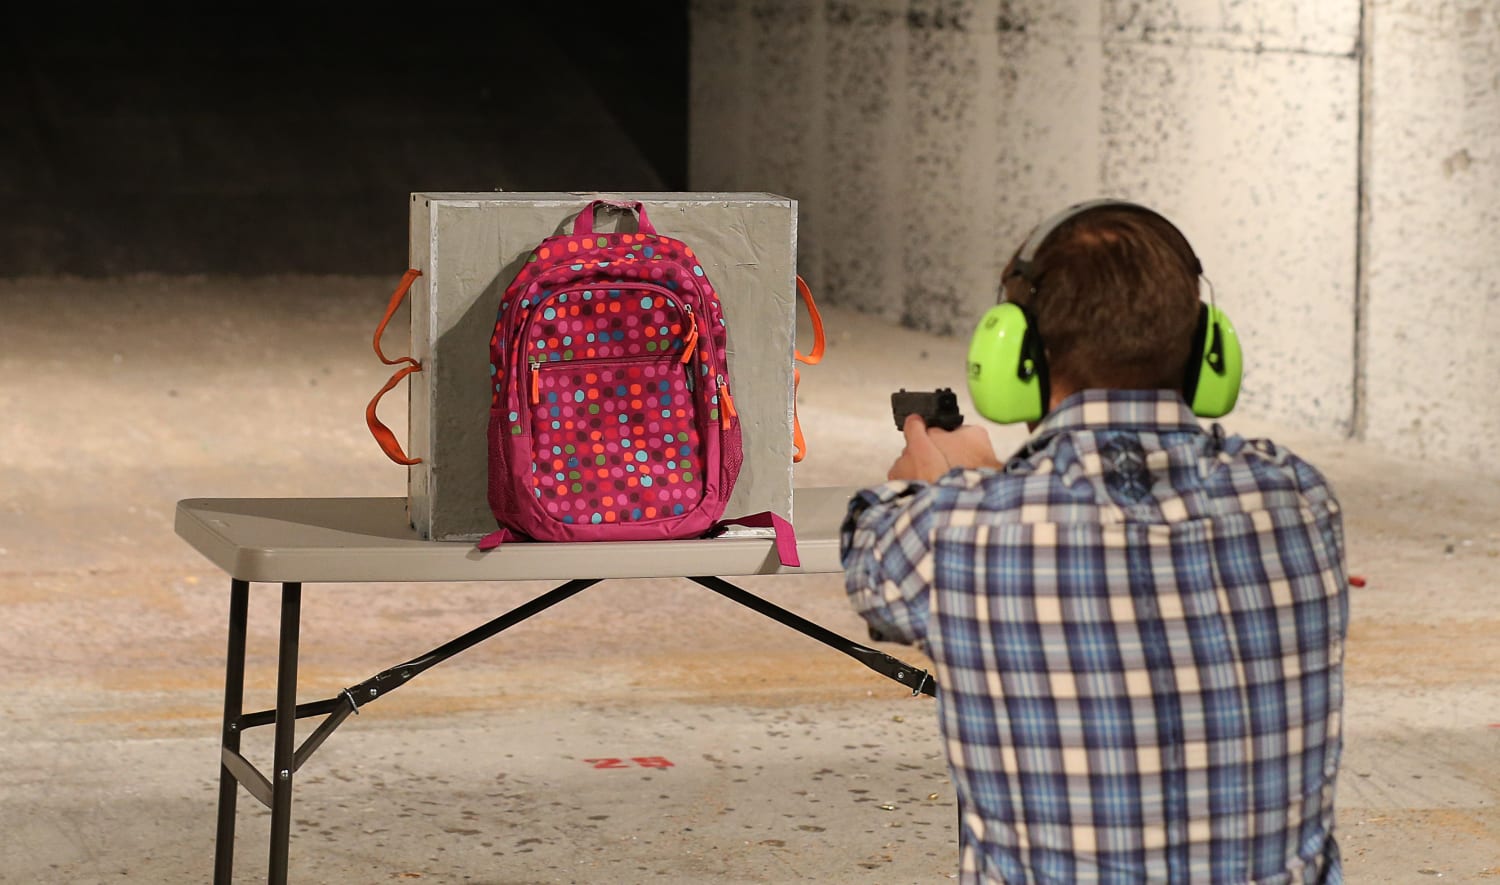 Bulletproof backpacks wouldn't have saved anyone in recent shootings